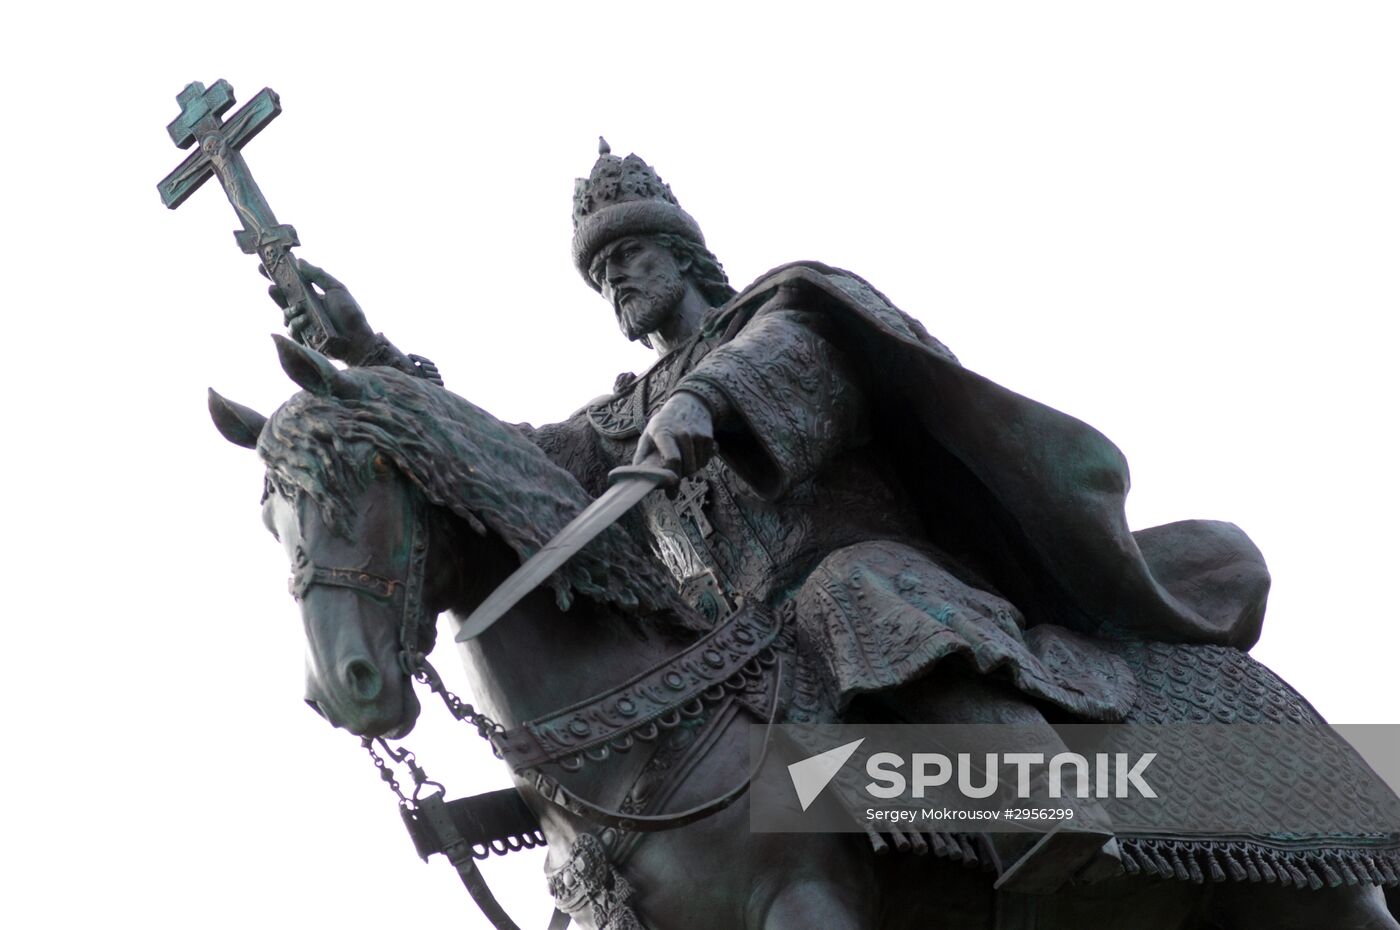 Russia's first monument to Ivan the Terrible unveiled in Oryol